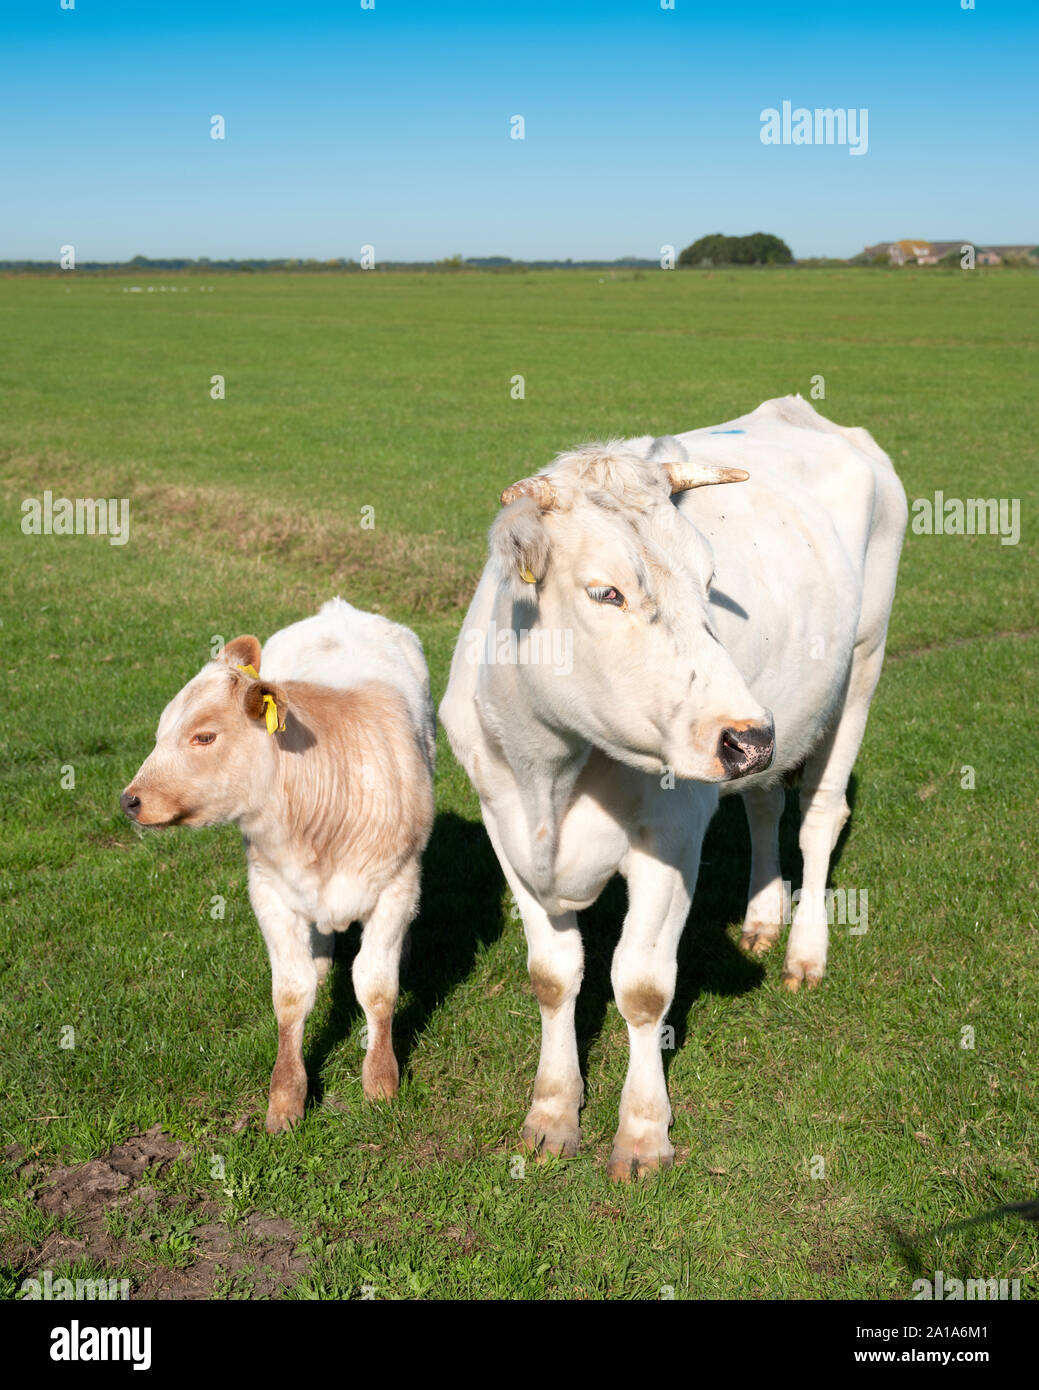 white cow and calf under blue sky in green grassy dutch meadow Stock Photo